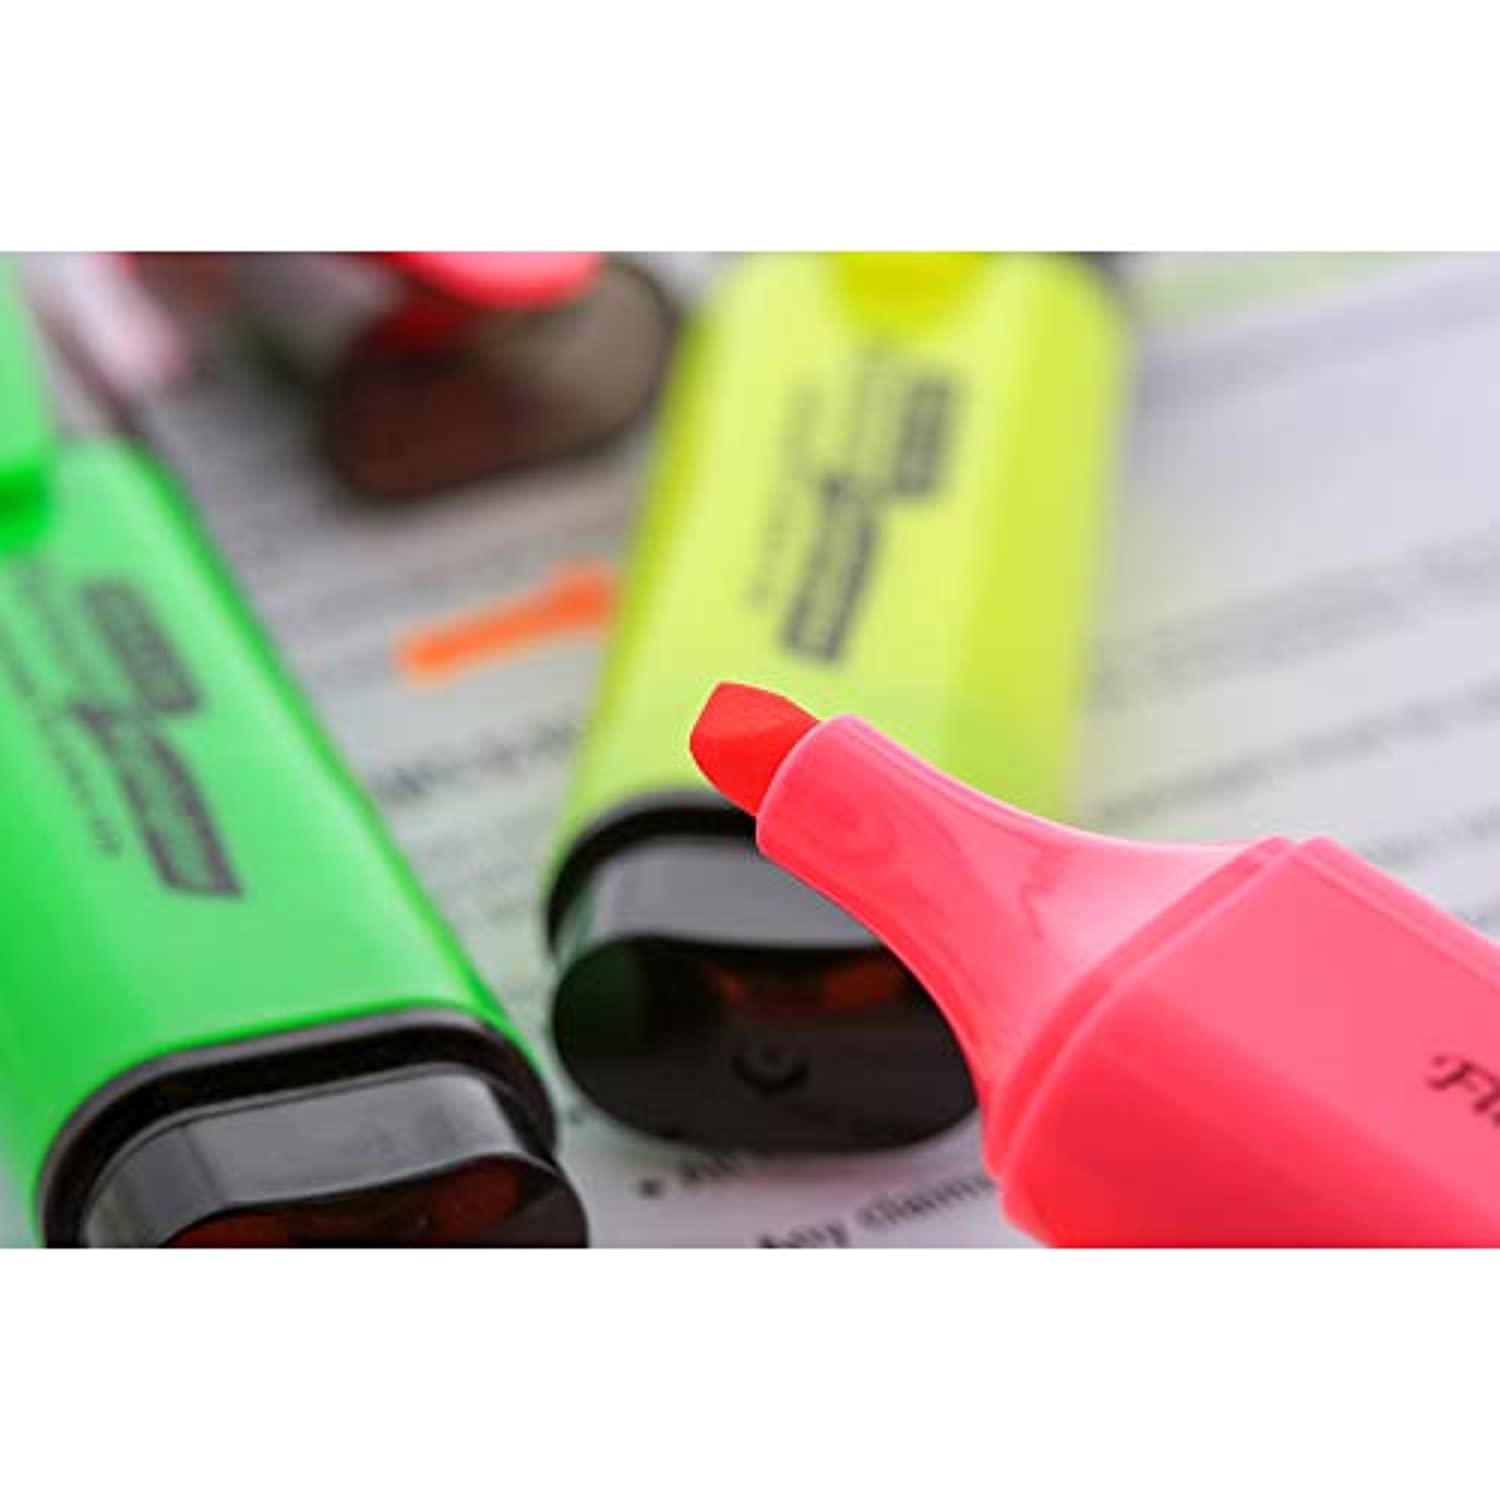 Neon Highlighters w/Pocket Clip, Chisel Tip Broad Fine Line, Unscented Quick Dry (4/Pack)